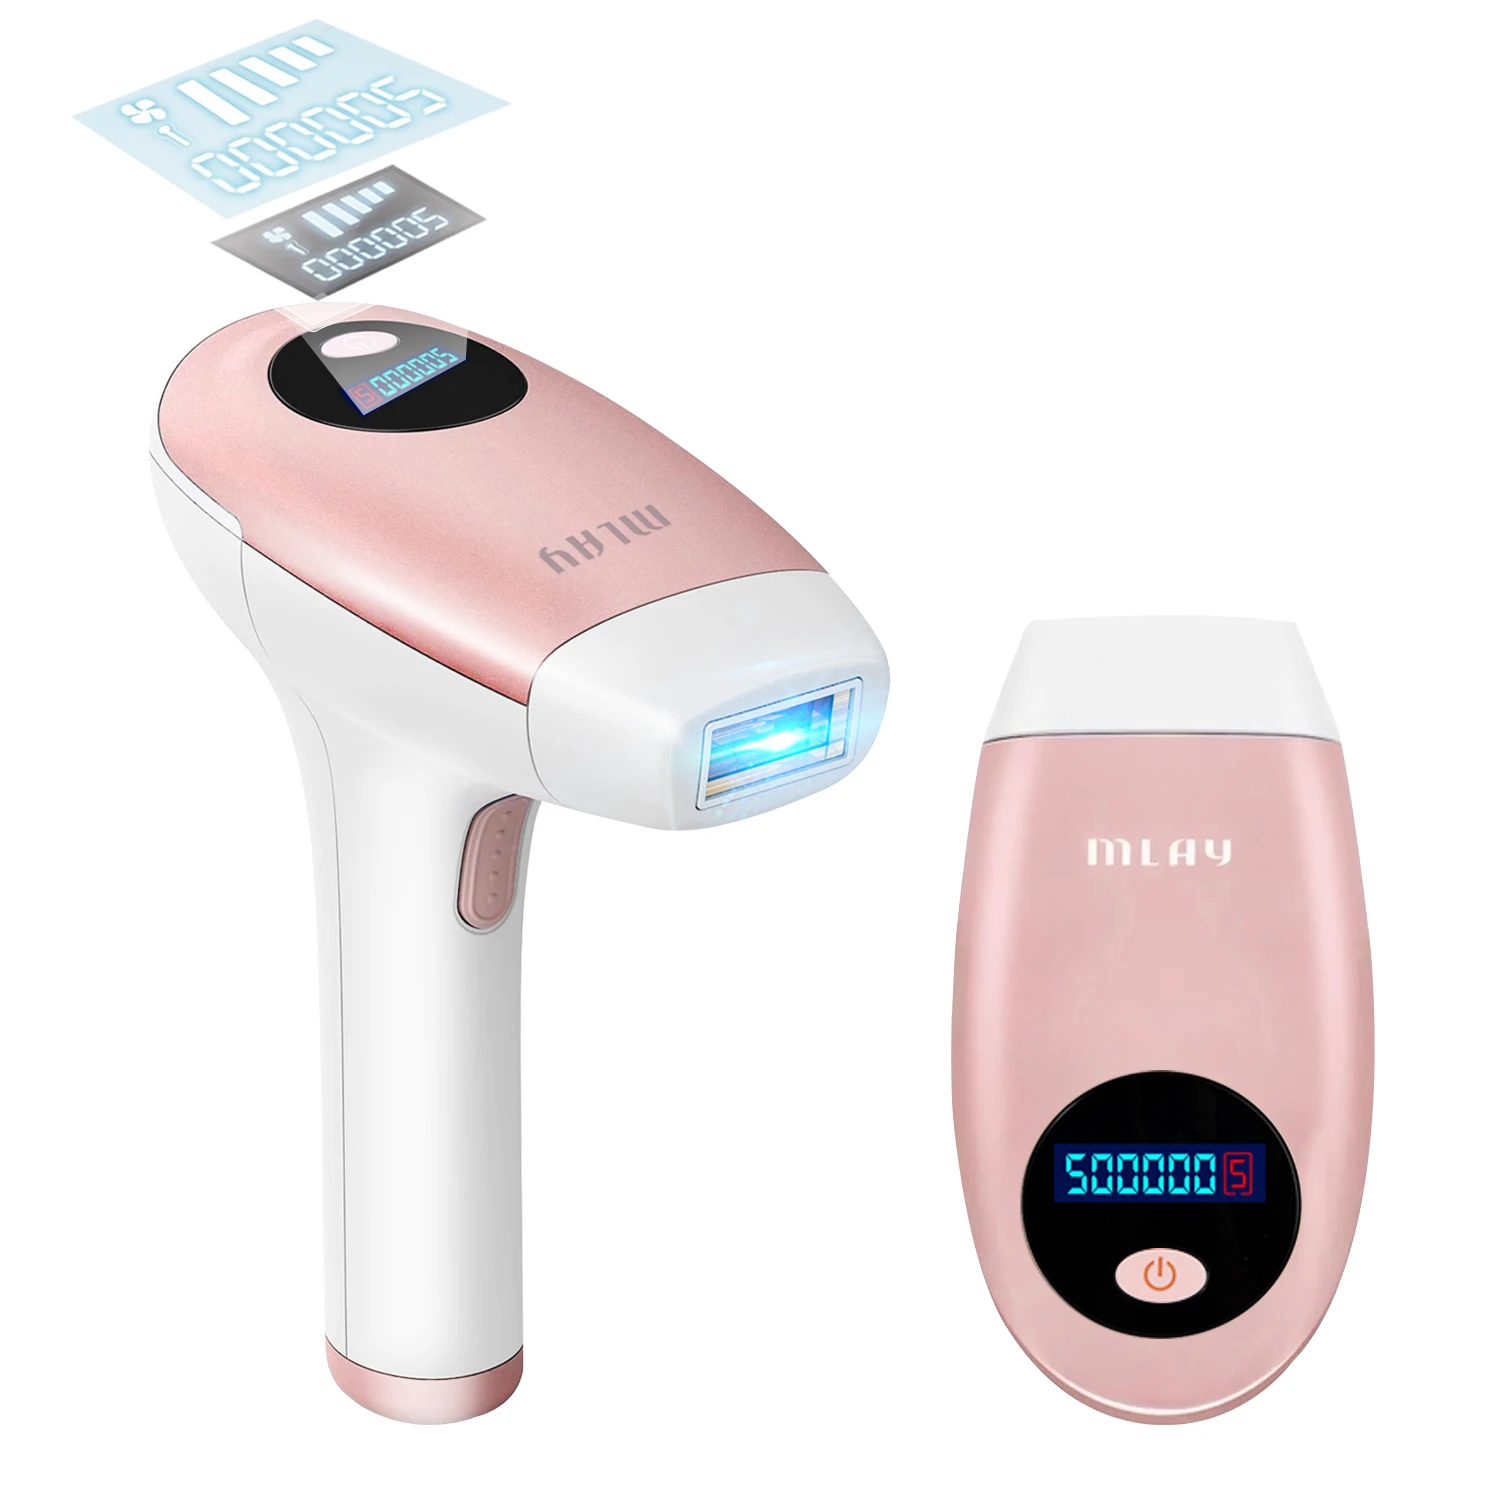 

Mlay IPL Hair Removal Epilator Permanent Painless Electric Depilador Machine Malay Hair Remove Machine a Laser 500000 Flashes